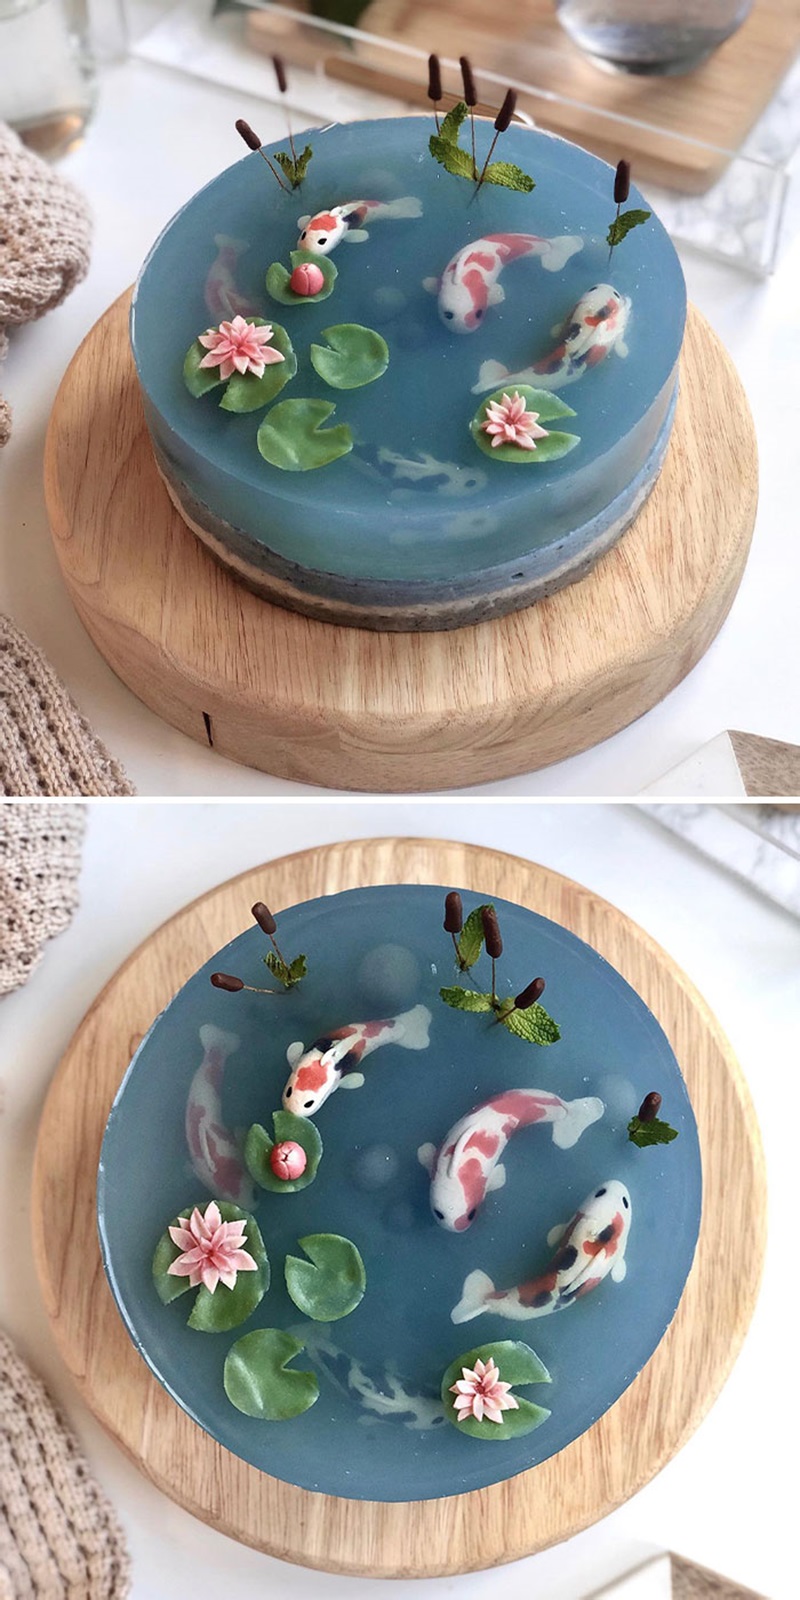 A Koi Pond Mousse Cake For Father's Day. Everything On The Cake Is Edible